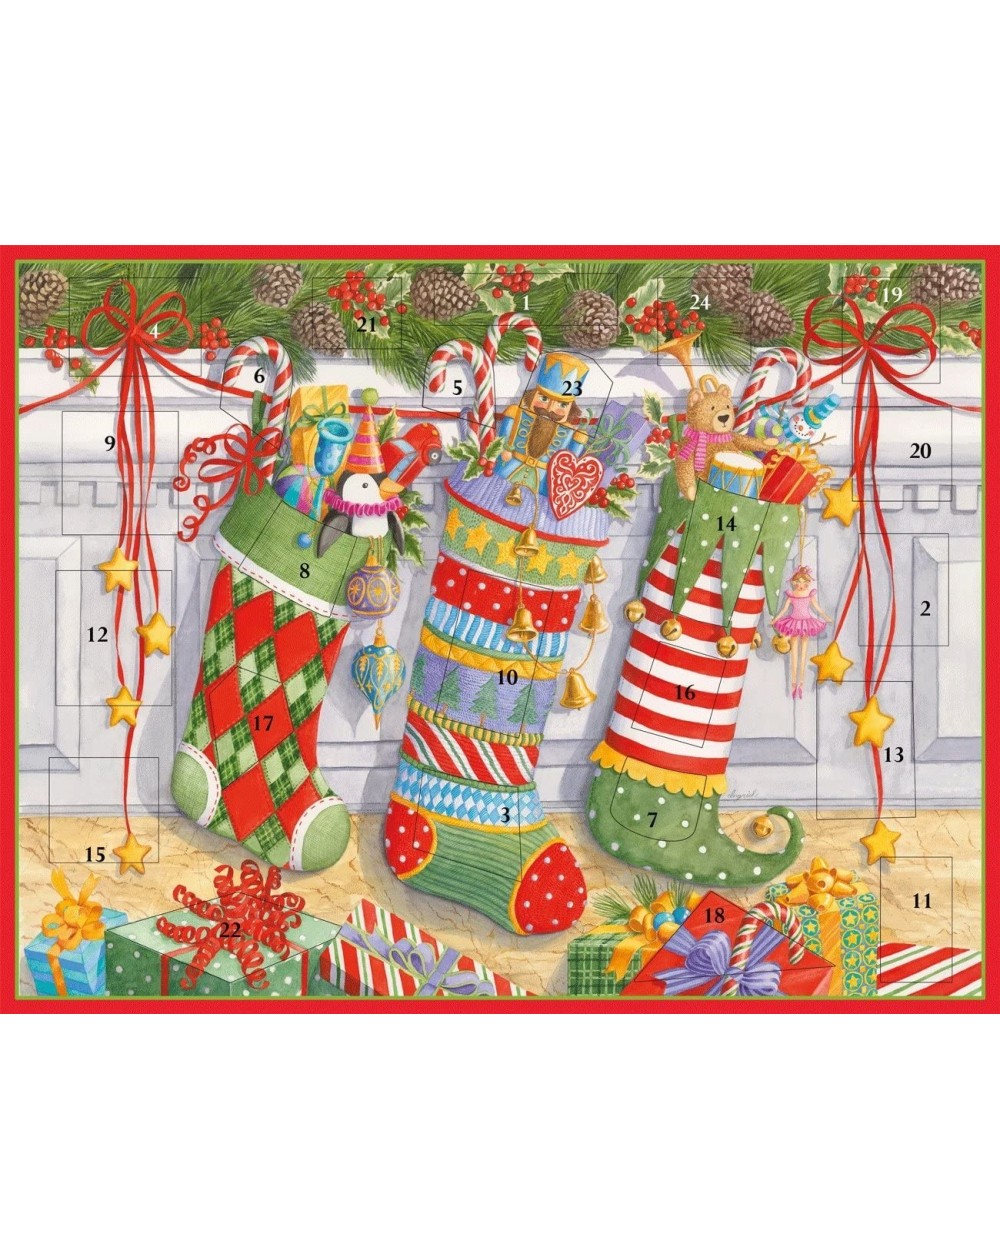 Advent Calendars Stockings on the Mantle Advent Calendar-1 Each- 17x13 In- Multicolor - CO183R0IO33 $19.86